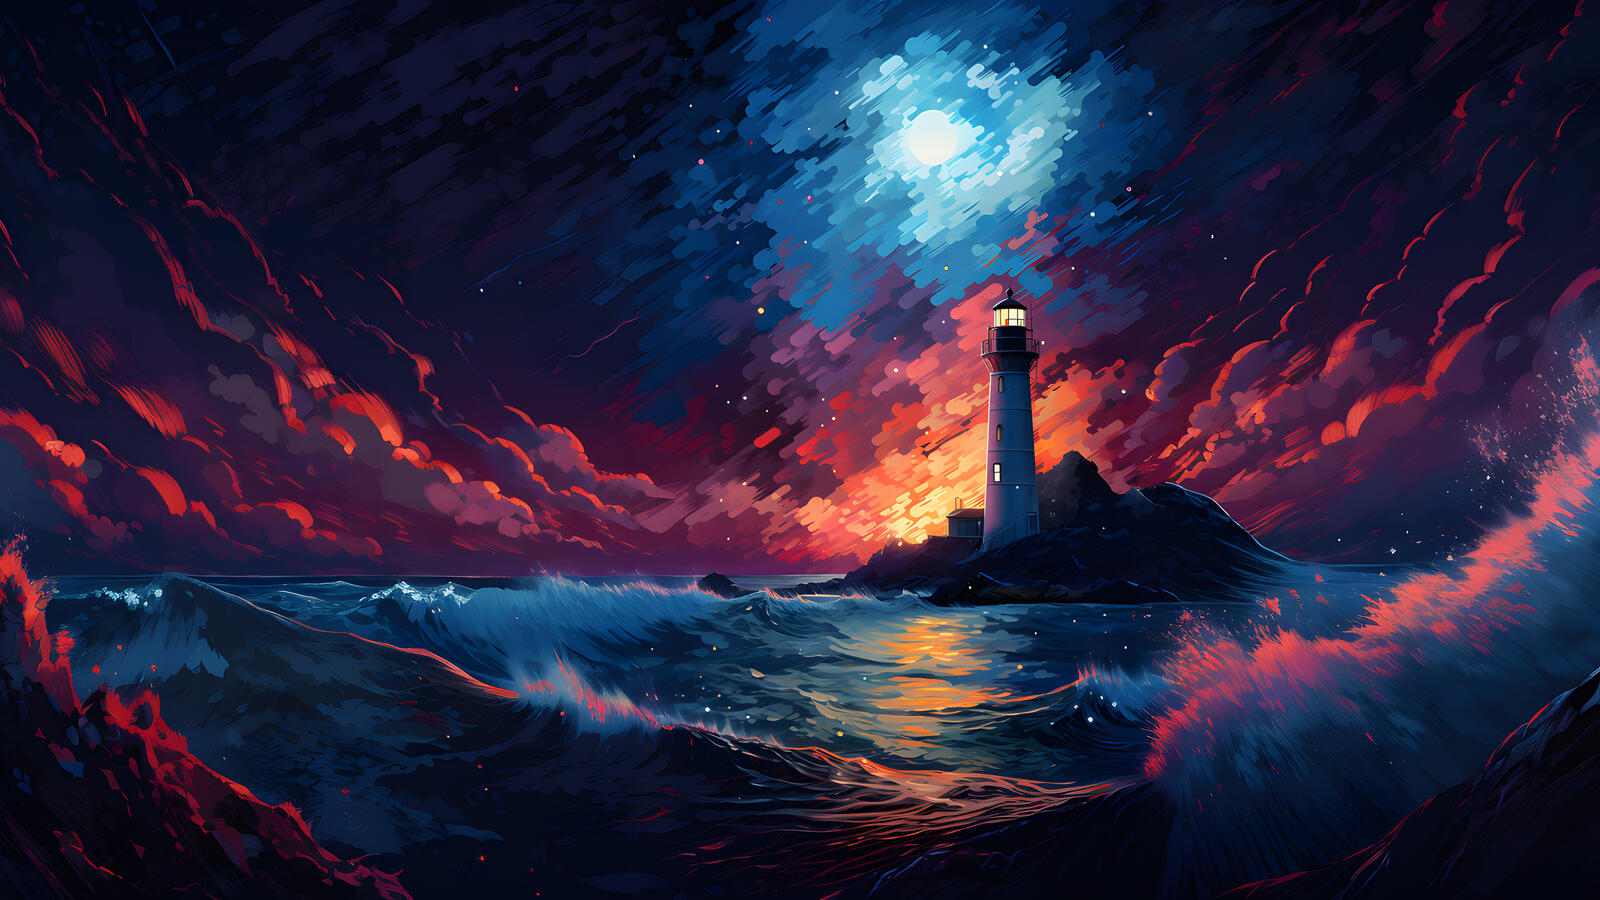 Free photo Paint drawing of a night lighthouse on an island in the ocean with the moon